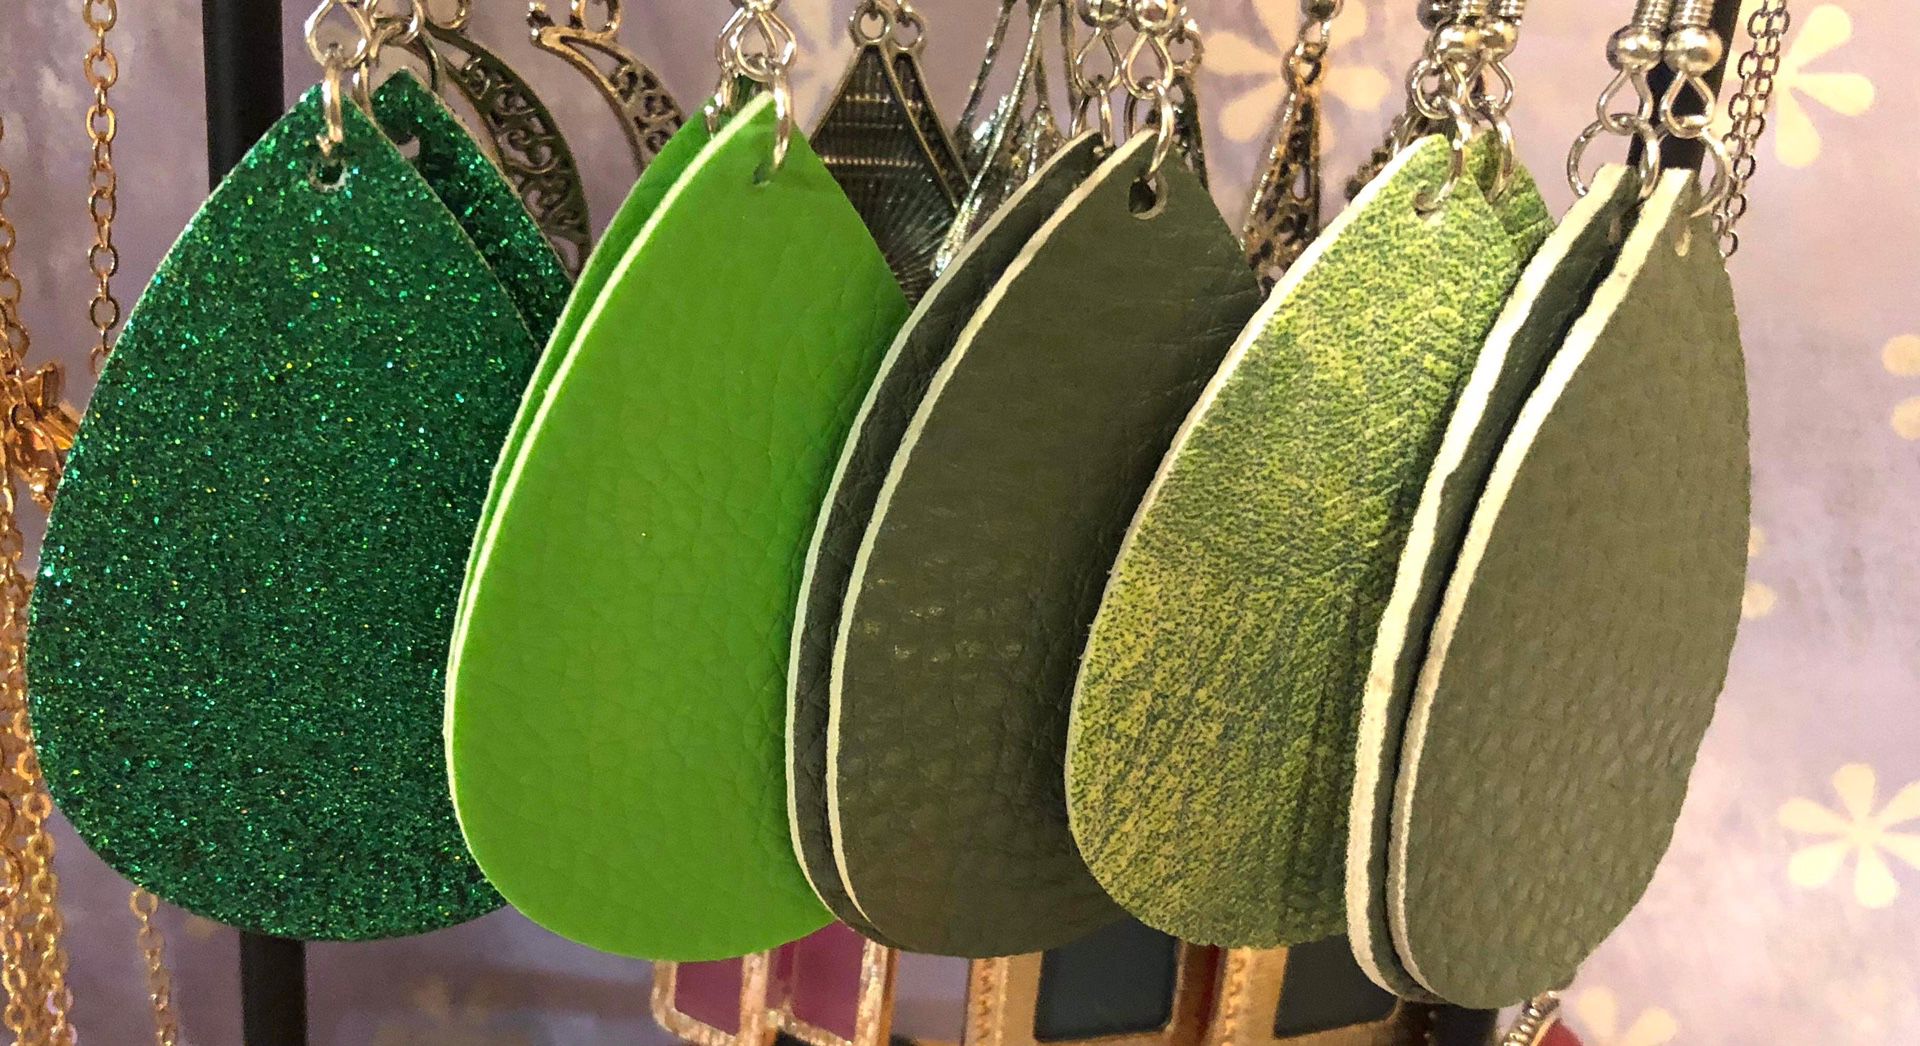 New Viridescent greens faux leather earrings $6 Ea 